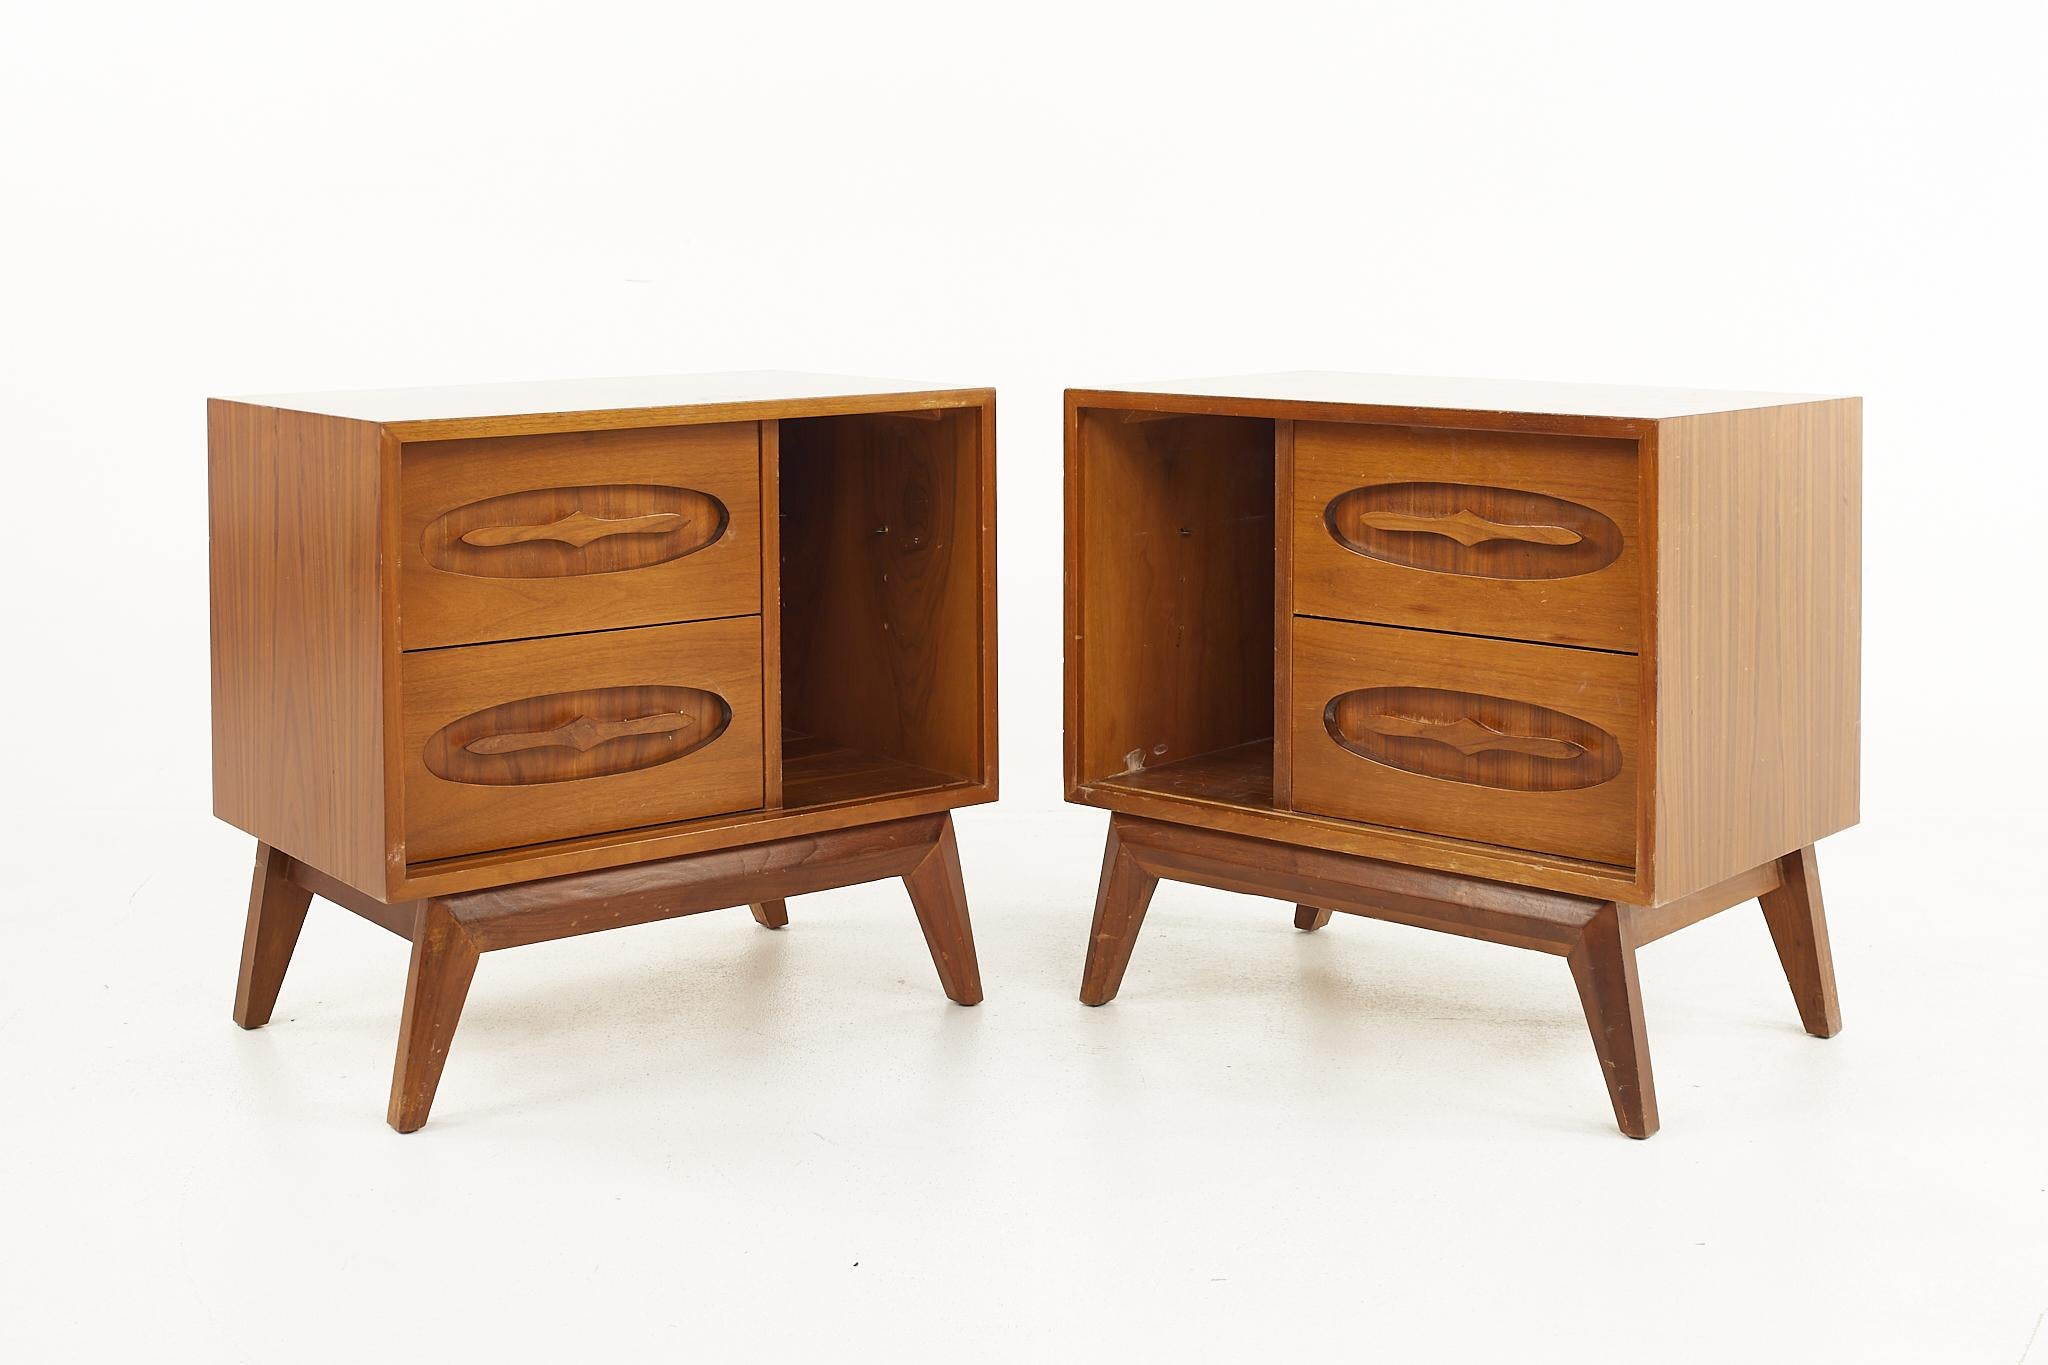 Young Manufacturing mid century walnut nightstands - a pair

Each nightstand measures: 26 wide x 17 deep x 24.75 inches high

All pieces of furniture can be had in what we call restored vintage condition. That means the piece is restored upon